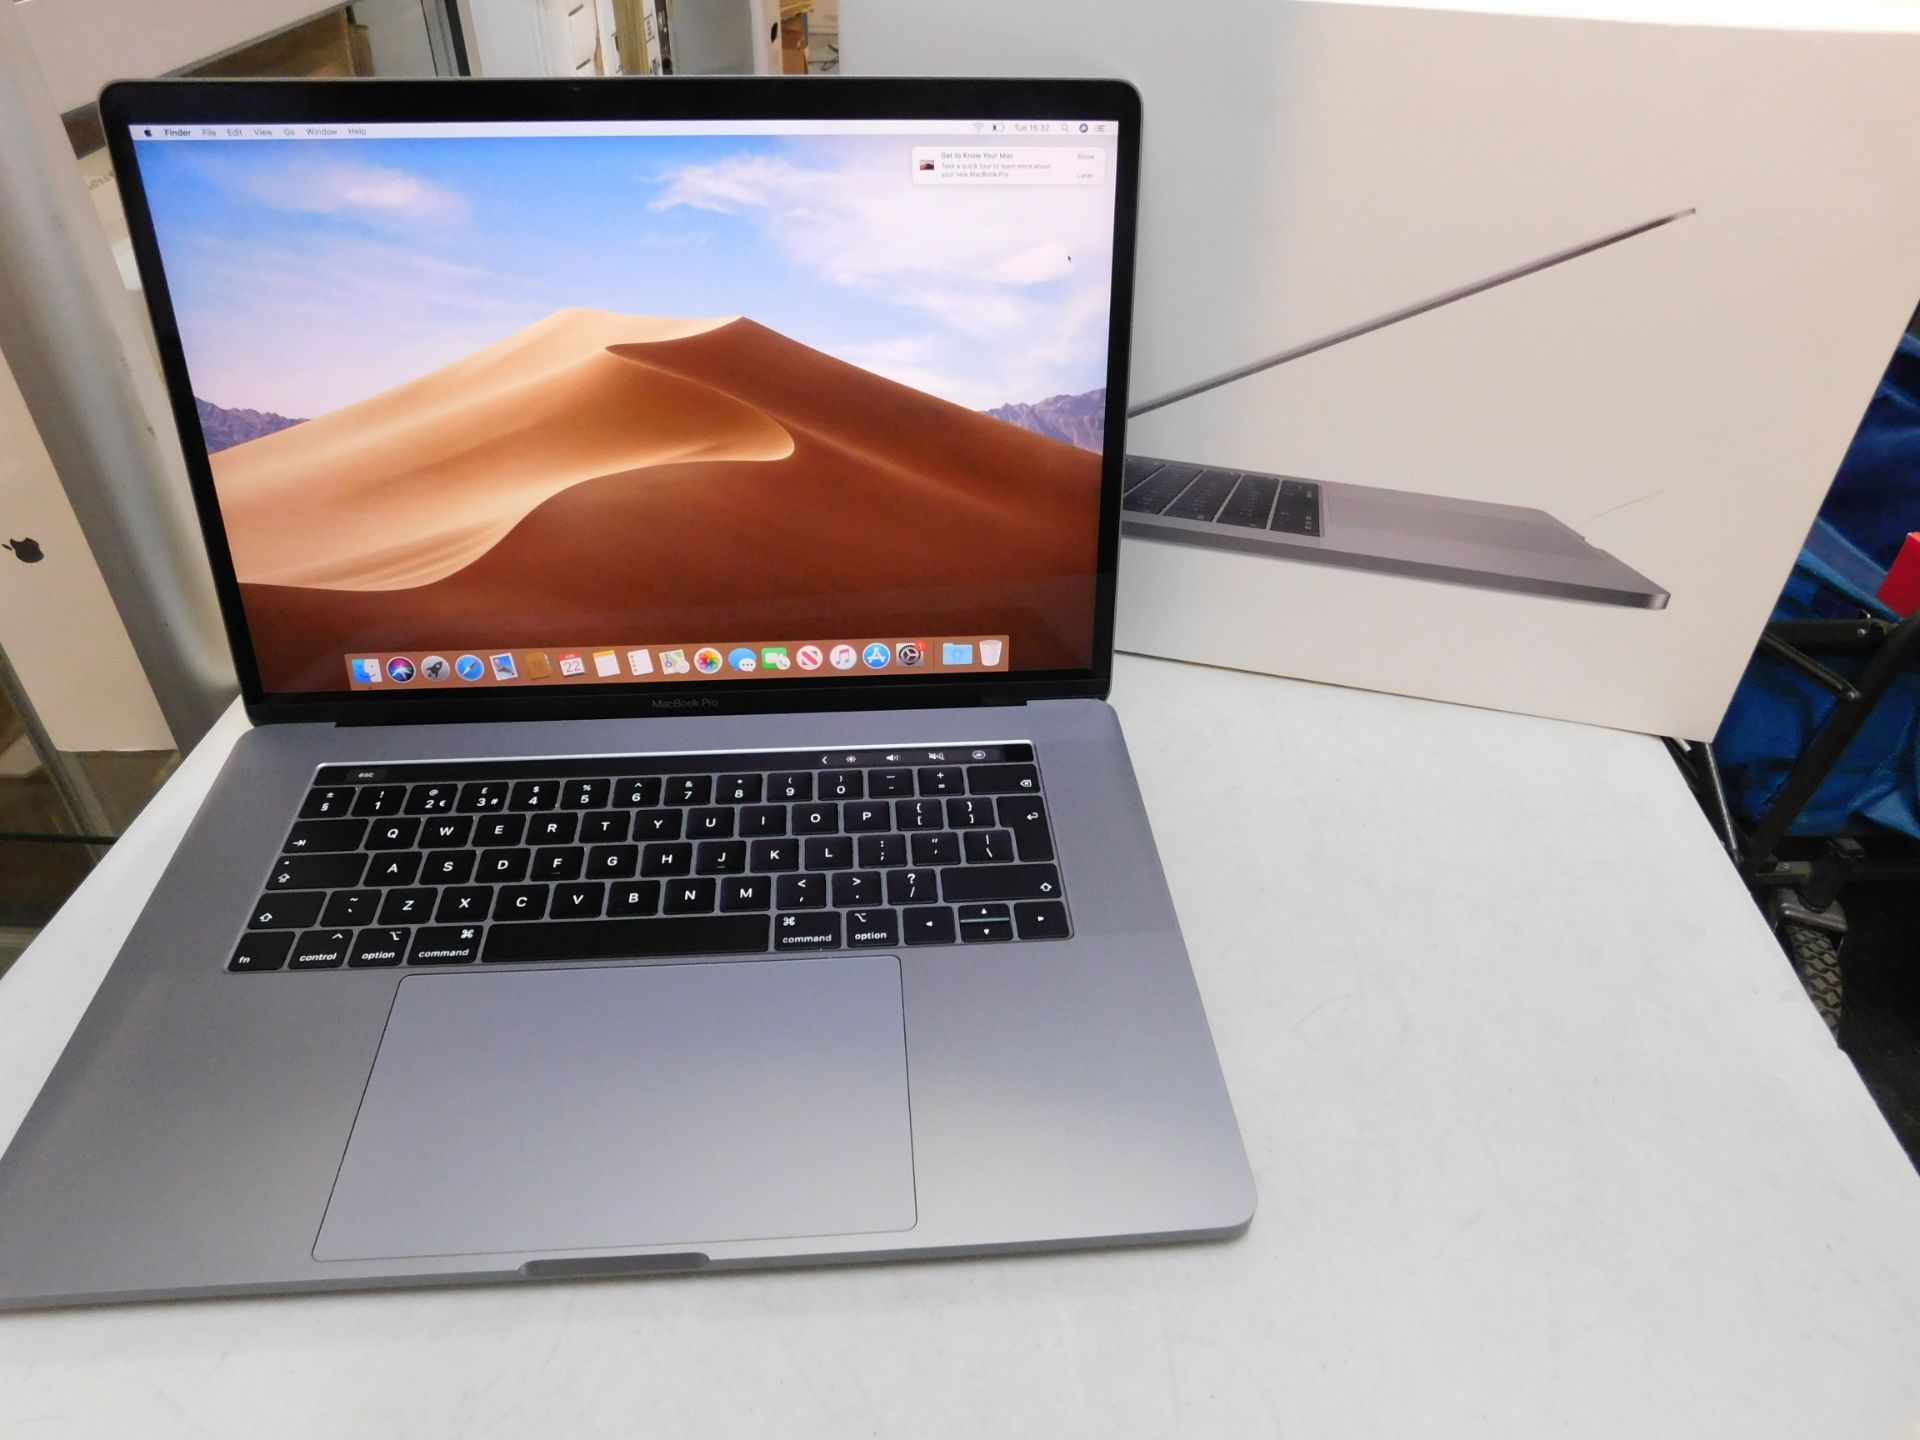 1 BOXED APPLE MACBOOK PRO 15" INTEL I7, 16GB RAM, 256GB SSD MODEL MV902B/A A1990 WITH CHARGER RRP